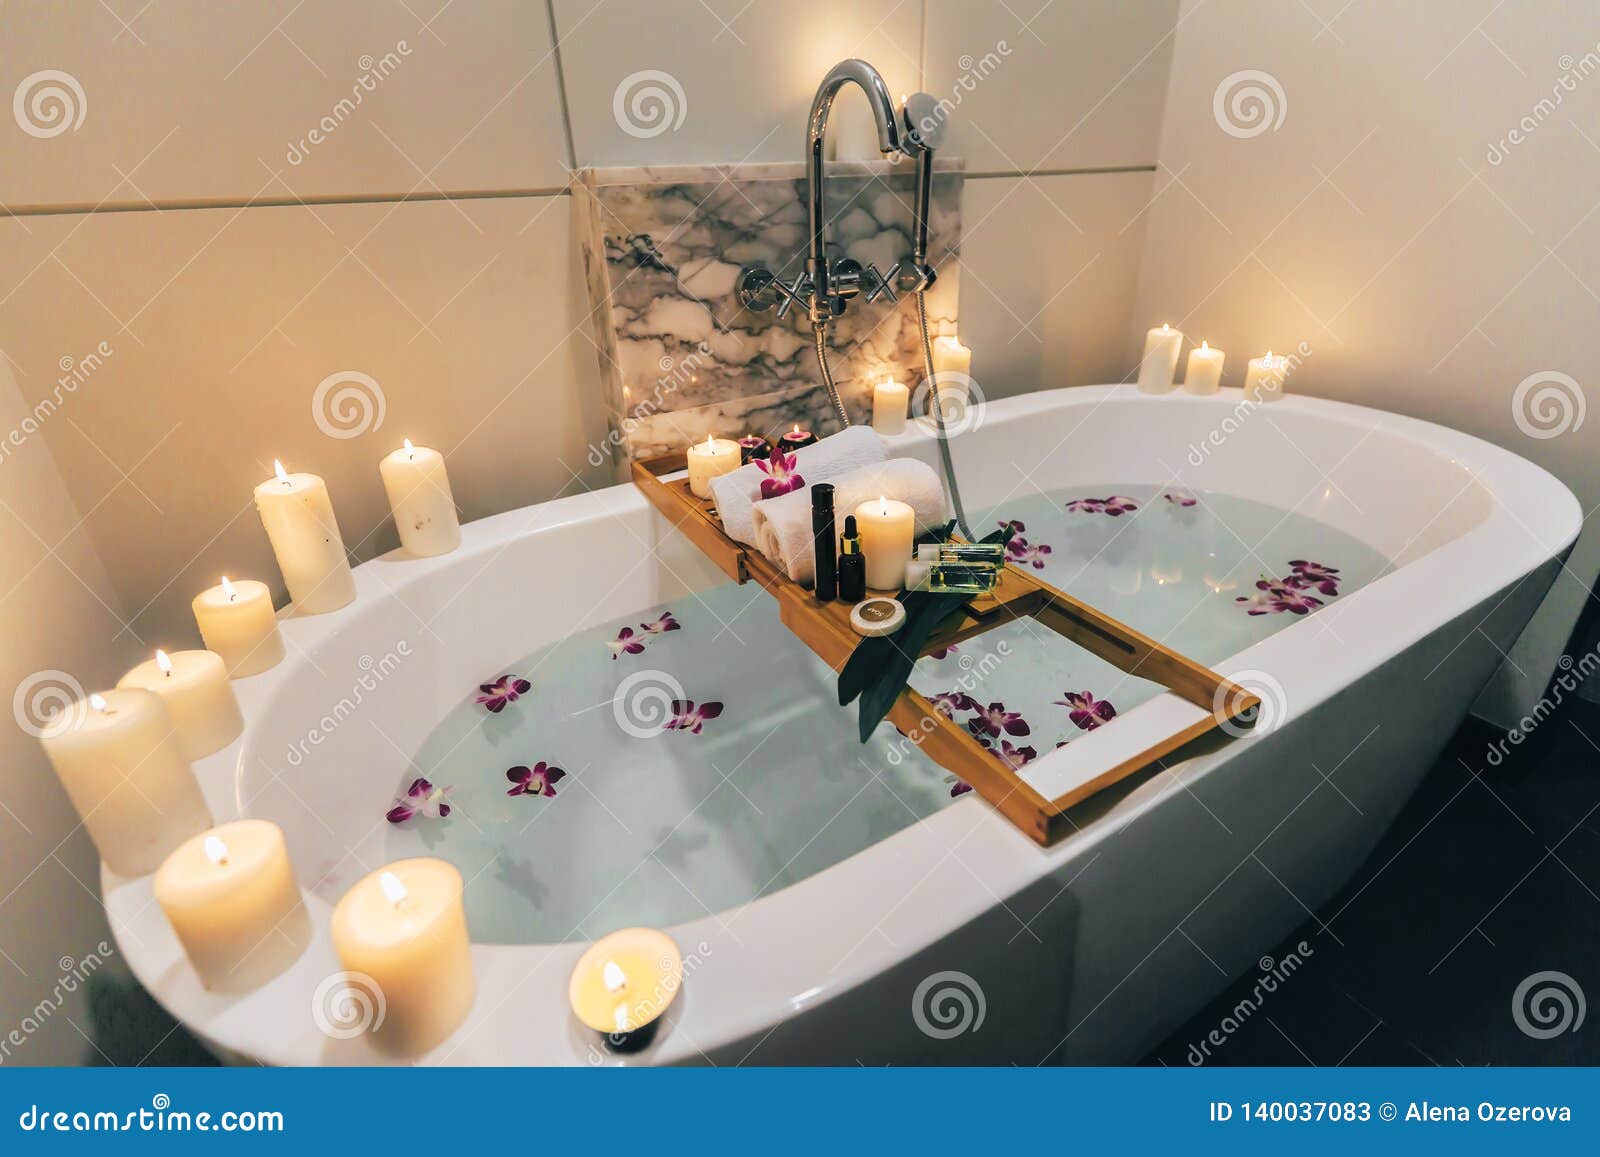 https://thumbs.dreamstime.com/z/spa-bath-flowers-candles-tray-prepared-luxury-decorated-wooden-140037083.jpg